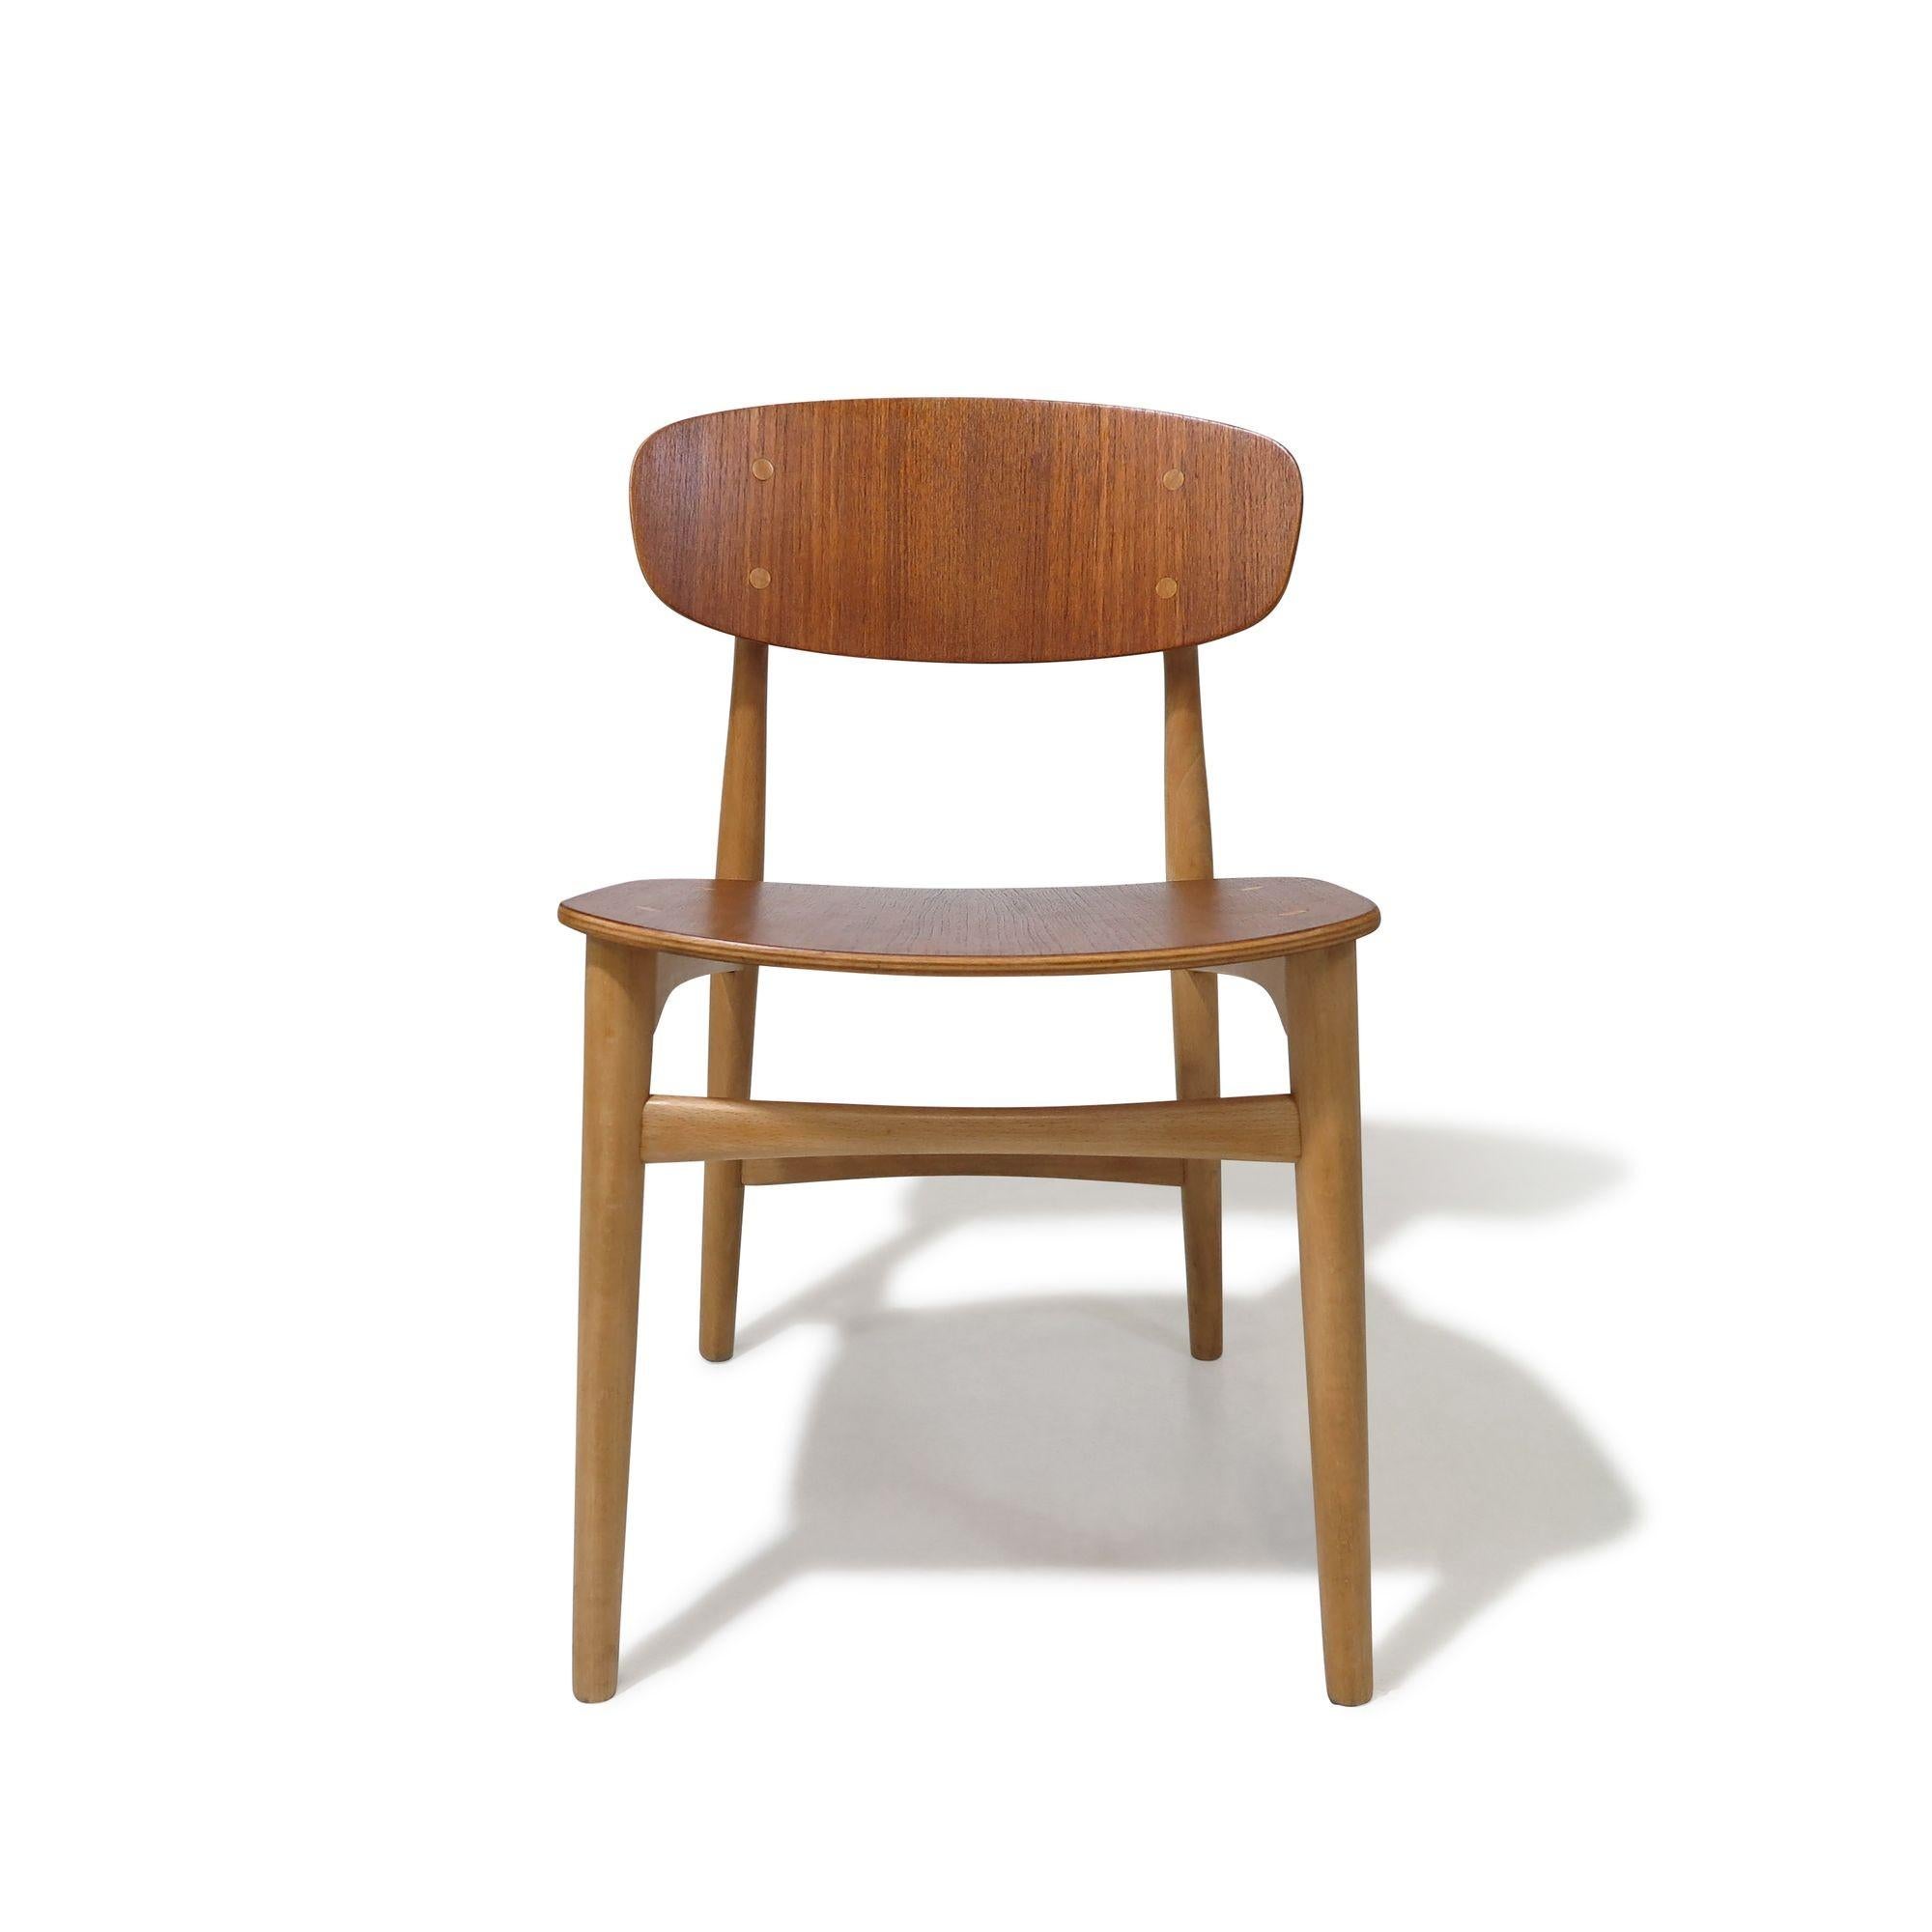 Eight Jens Hjorth Beech and Teak Mid-century Danish Dining Chairs For Sale 4